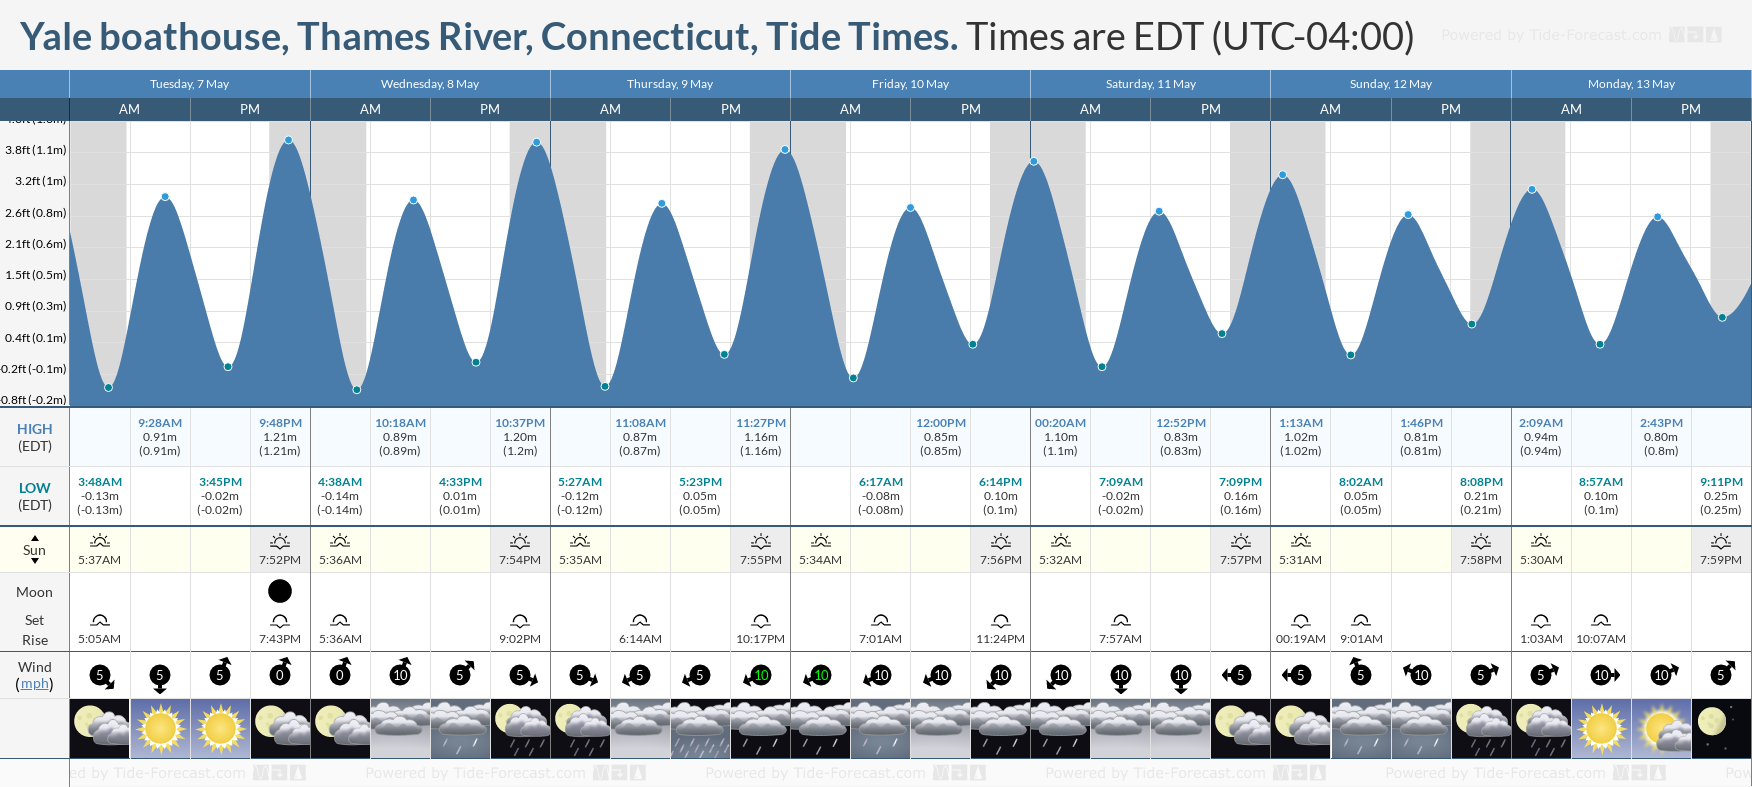 Yale boathouse, Thames River, Connecticut Tide Chart including high and low tide tide times for the next 7 days